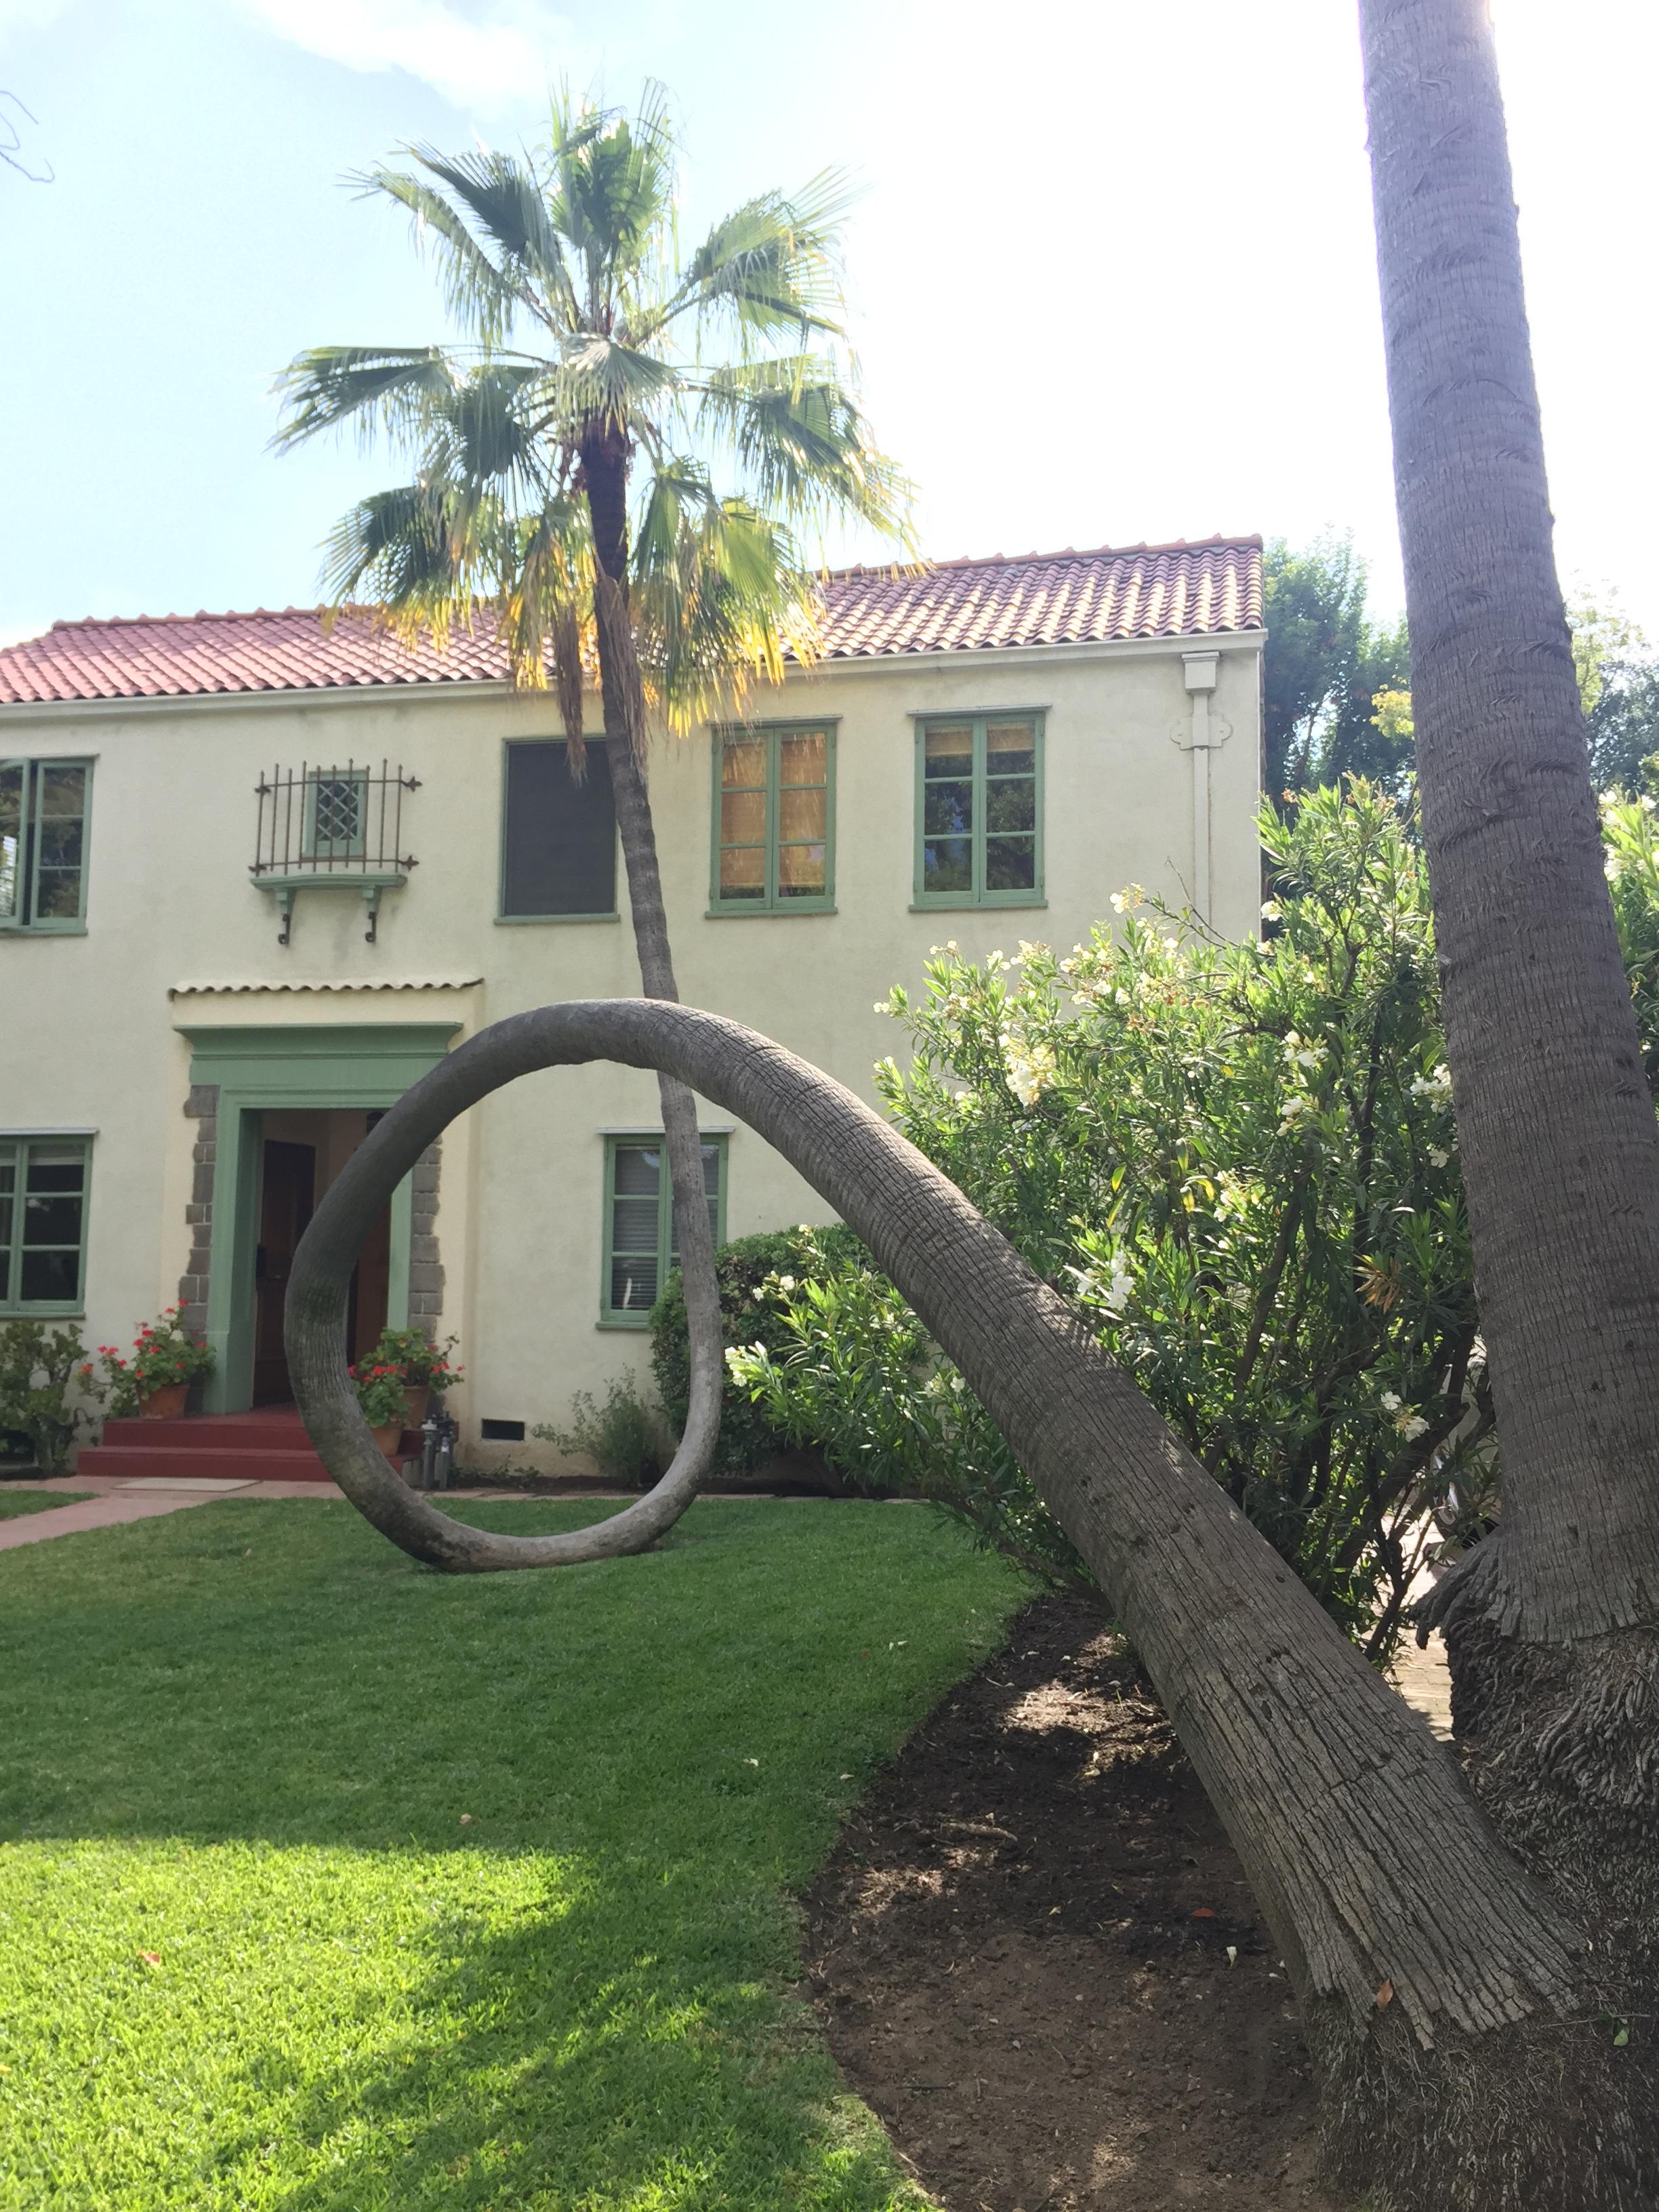 this palm tree fell over and curved right back up : mildlyinteresting